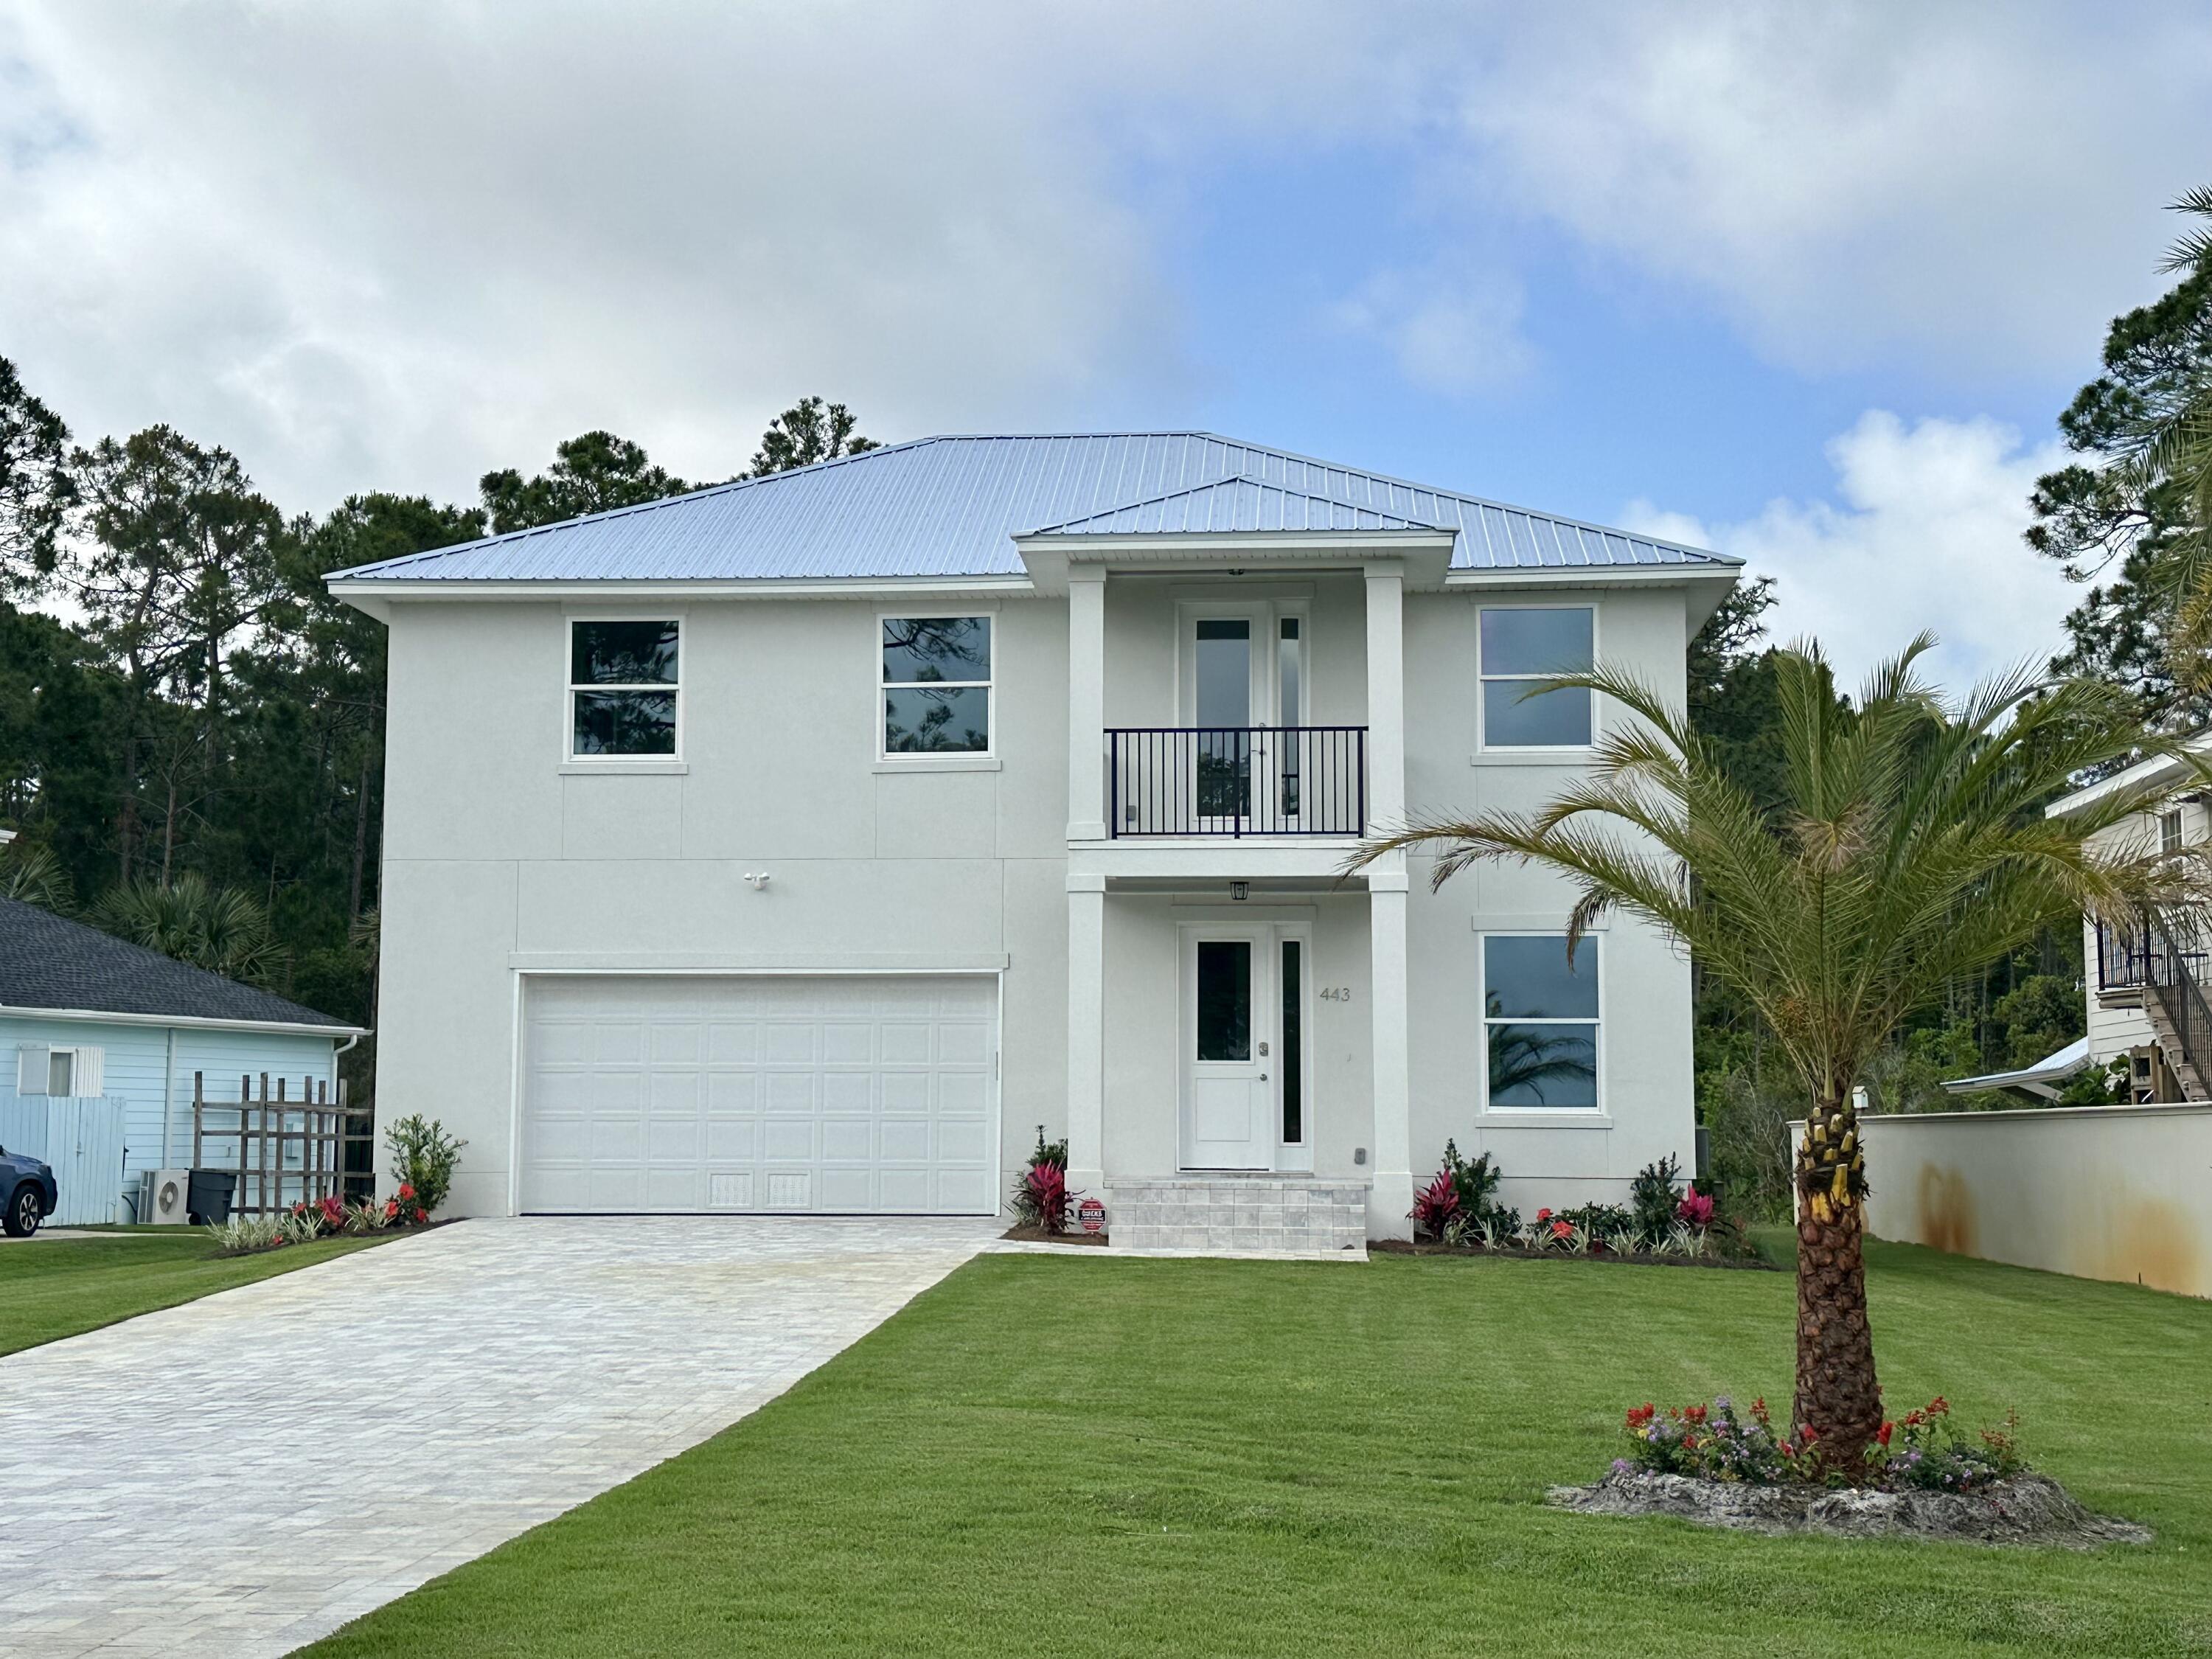 443 Shelter Cove Drive, Santa Rosa Beach, Florida, 32459, United States, 4 Bedrooms Bedrooms, ,4 BathroomsBathrooms,Residential,For Sale,443 Shelter Cove Drive,1340476